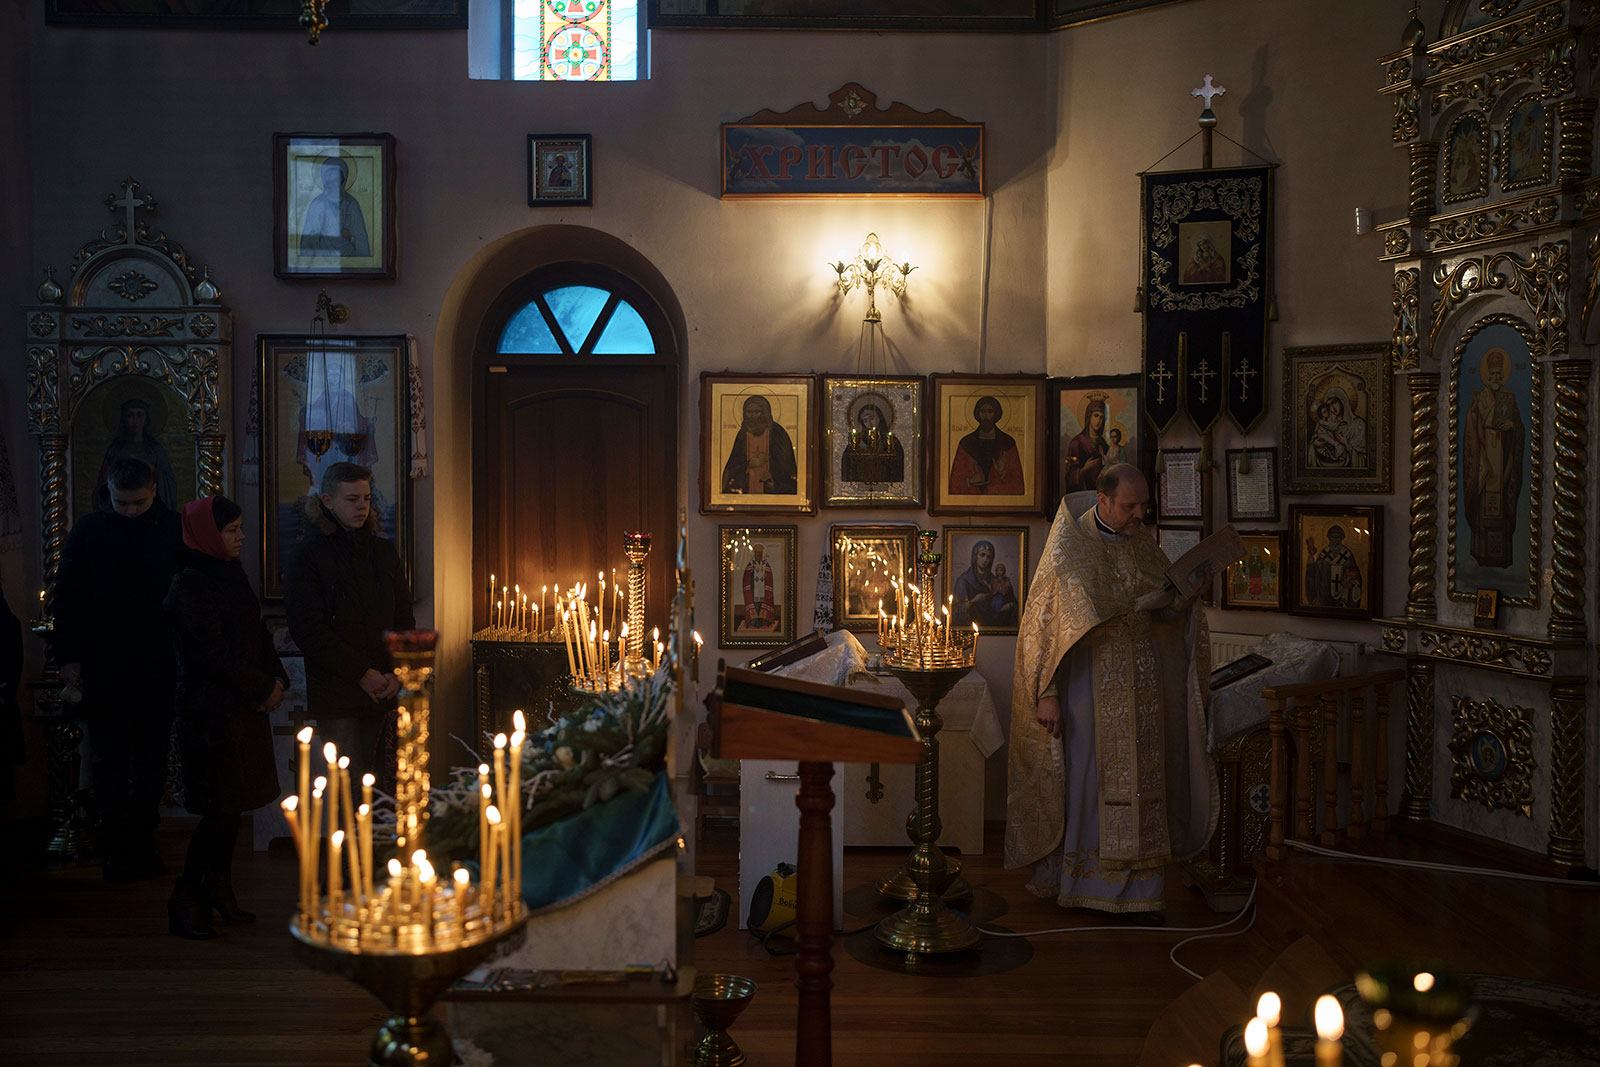 Ukrainians attend a Christmas mass at an Orthodox church in the outskirts of Kyiv, Ukraine, on Sunday, December 25. 